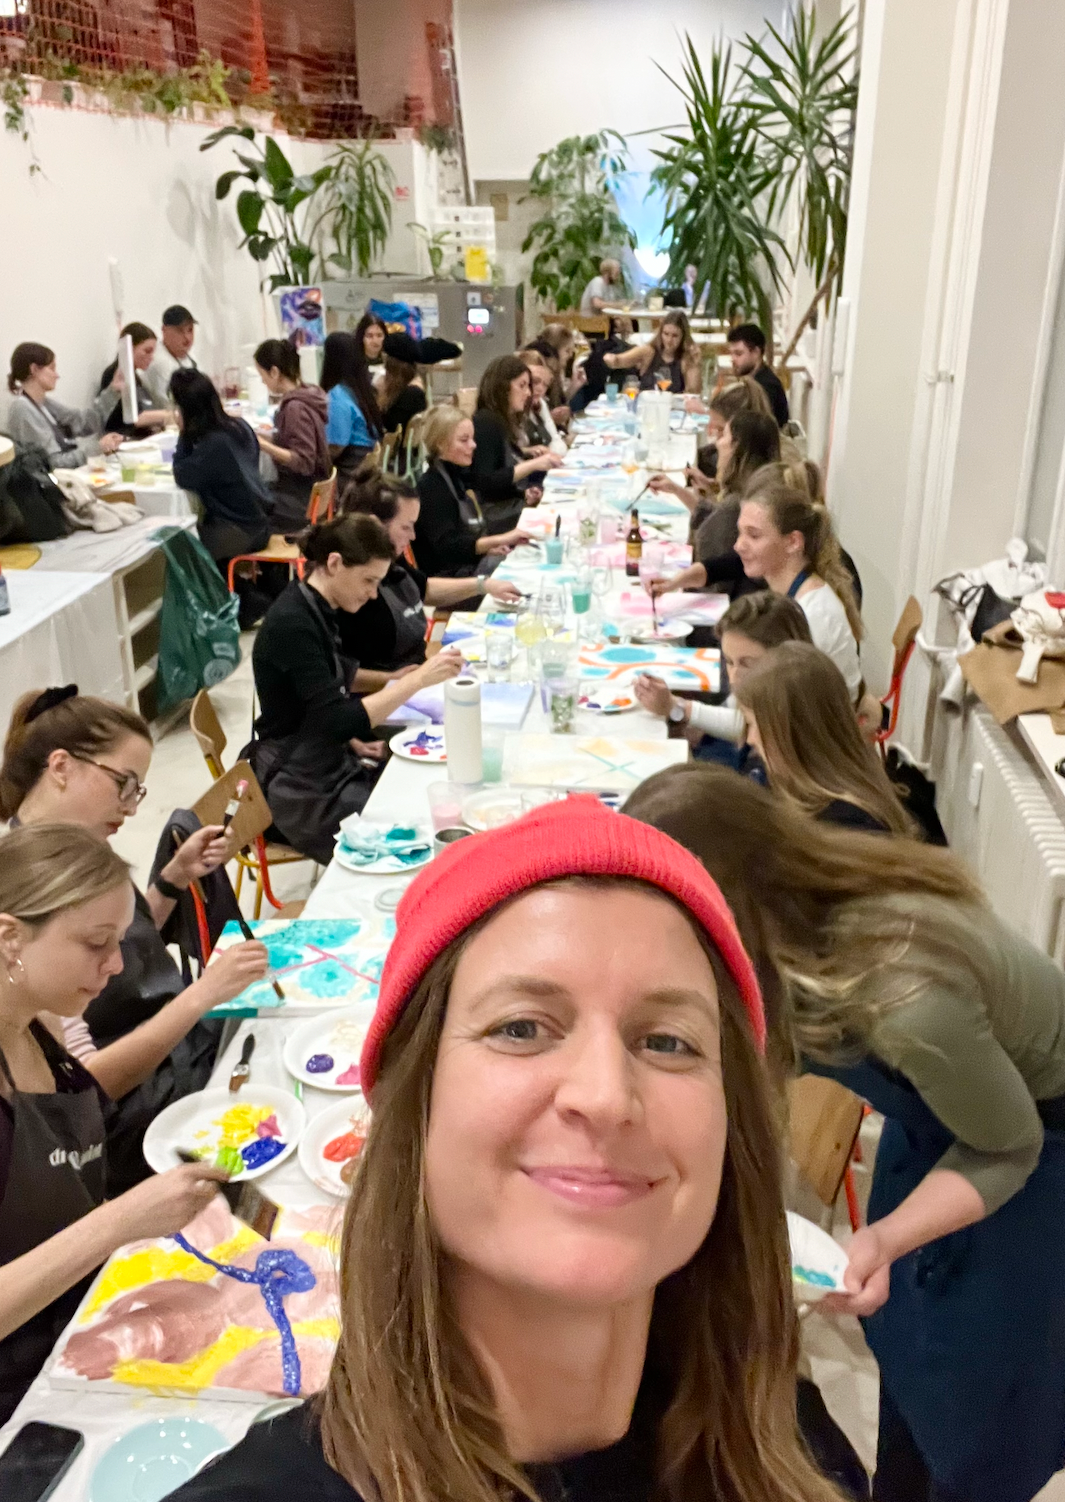 Team Building Painting Workshop "Emotional, Abstract Art" with Kat in Berlin, Germany by subcultours